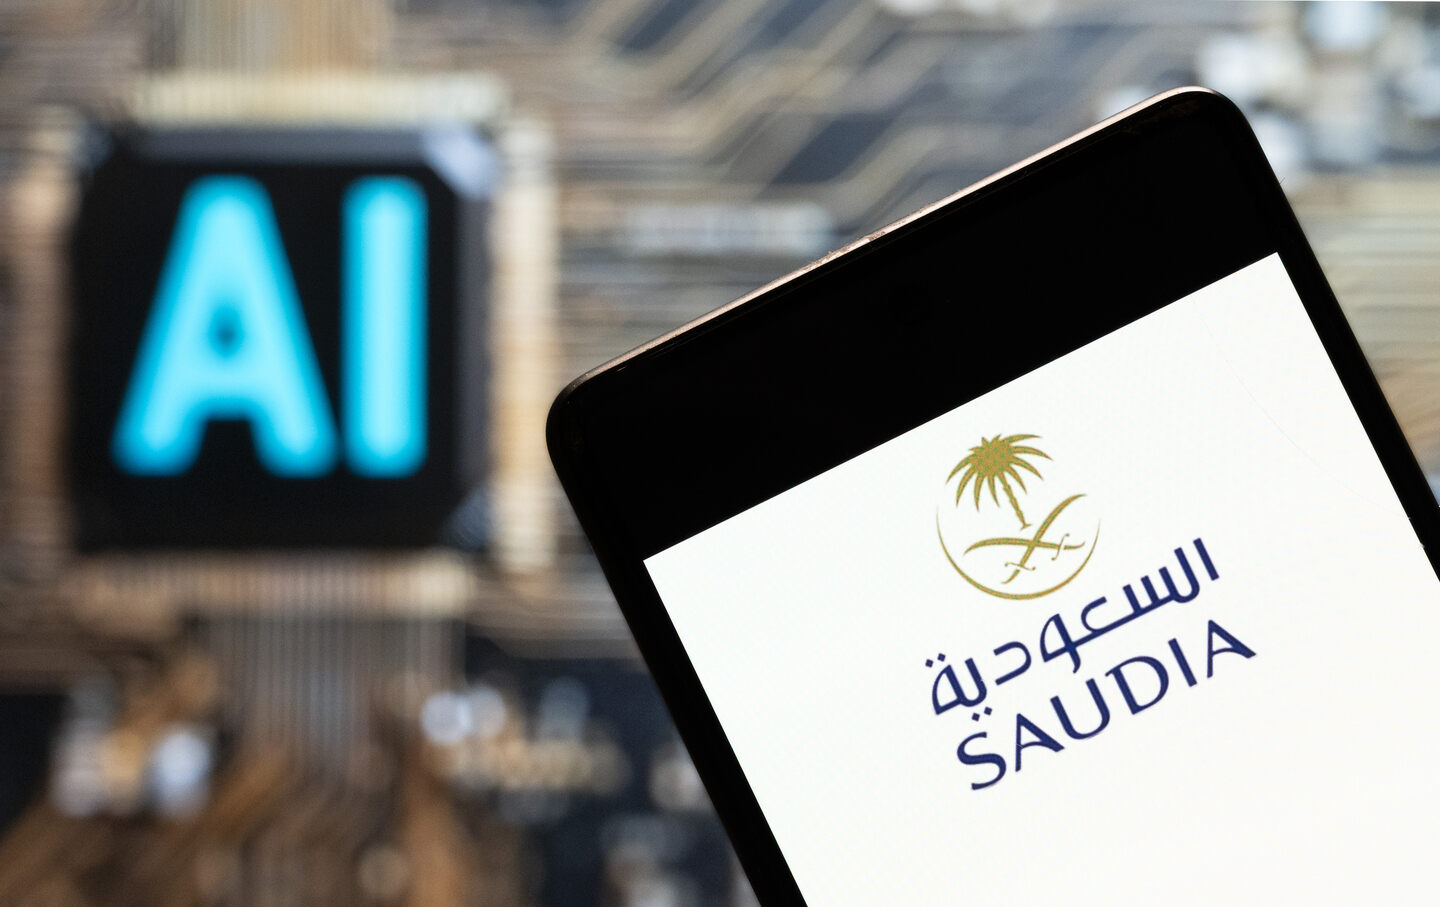 The Saudi Arabian Airlines (Saudia) logo seen displayed on a smartphone with an Artificial intelligence (AI) chip and symbol in the background.